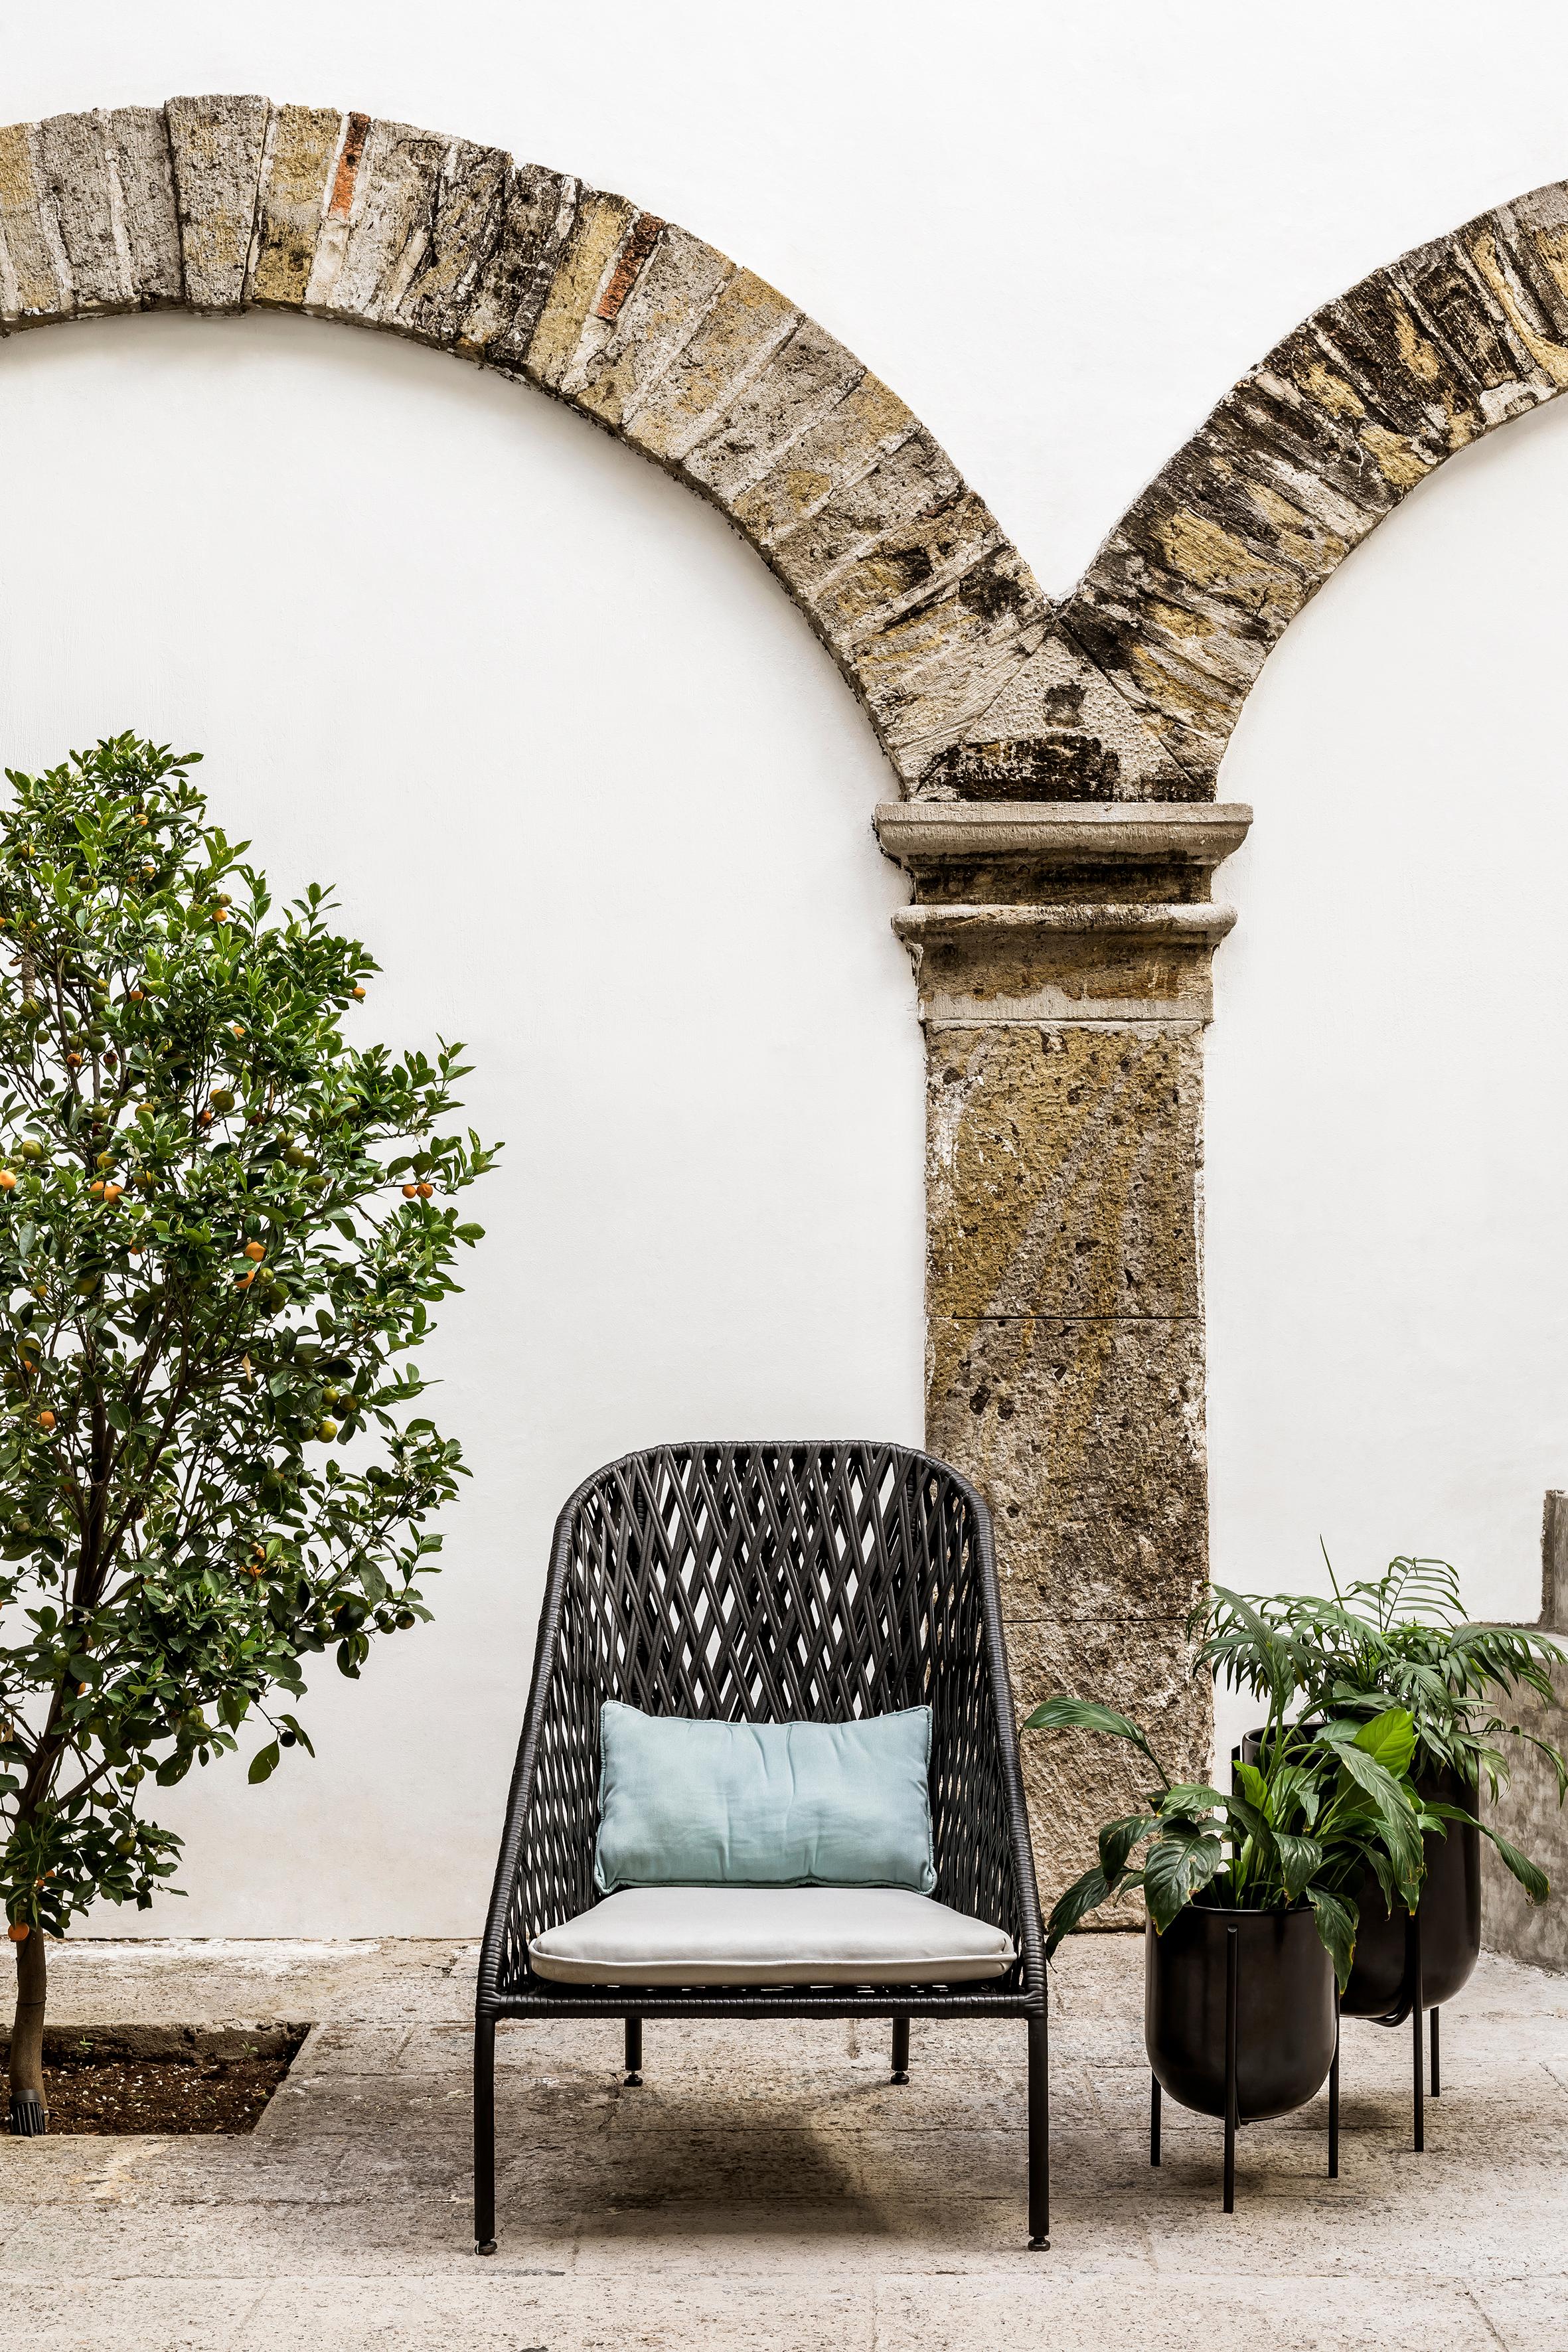 A spacious and low chair perfect for resting and relaxing.? Combines synthetic weaving technique with an aluminium light structure perfect for outdoor living. 
“Tumbona” is total comfort. Its concave shape embraces you naturally allowing a total